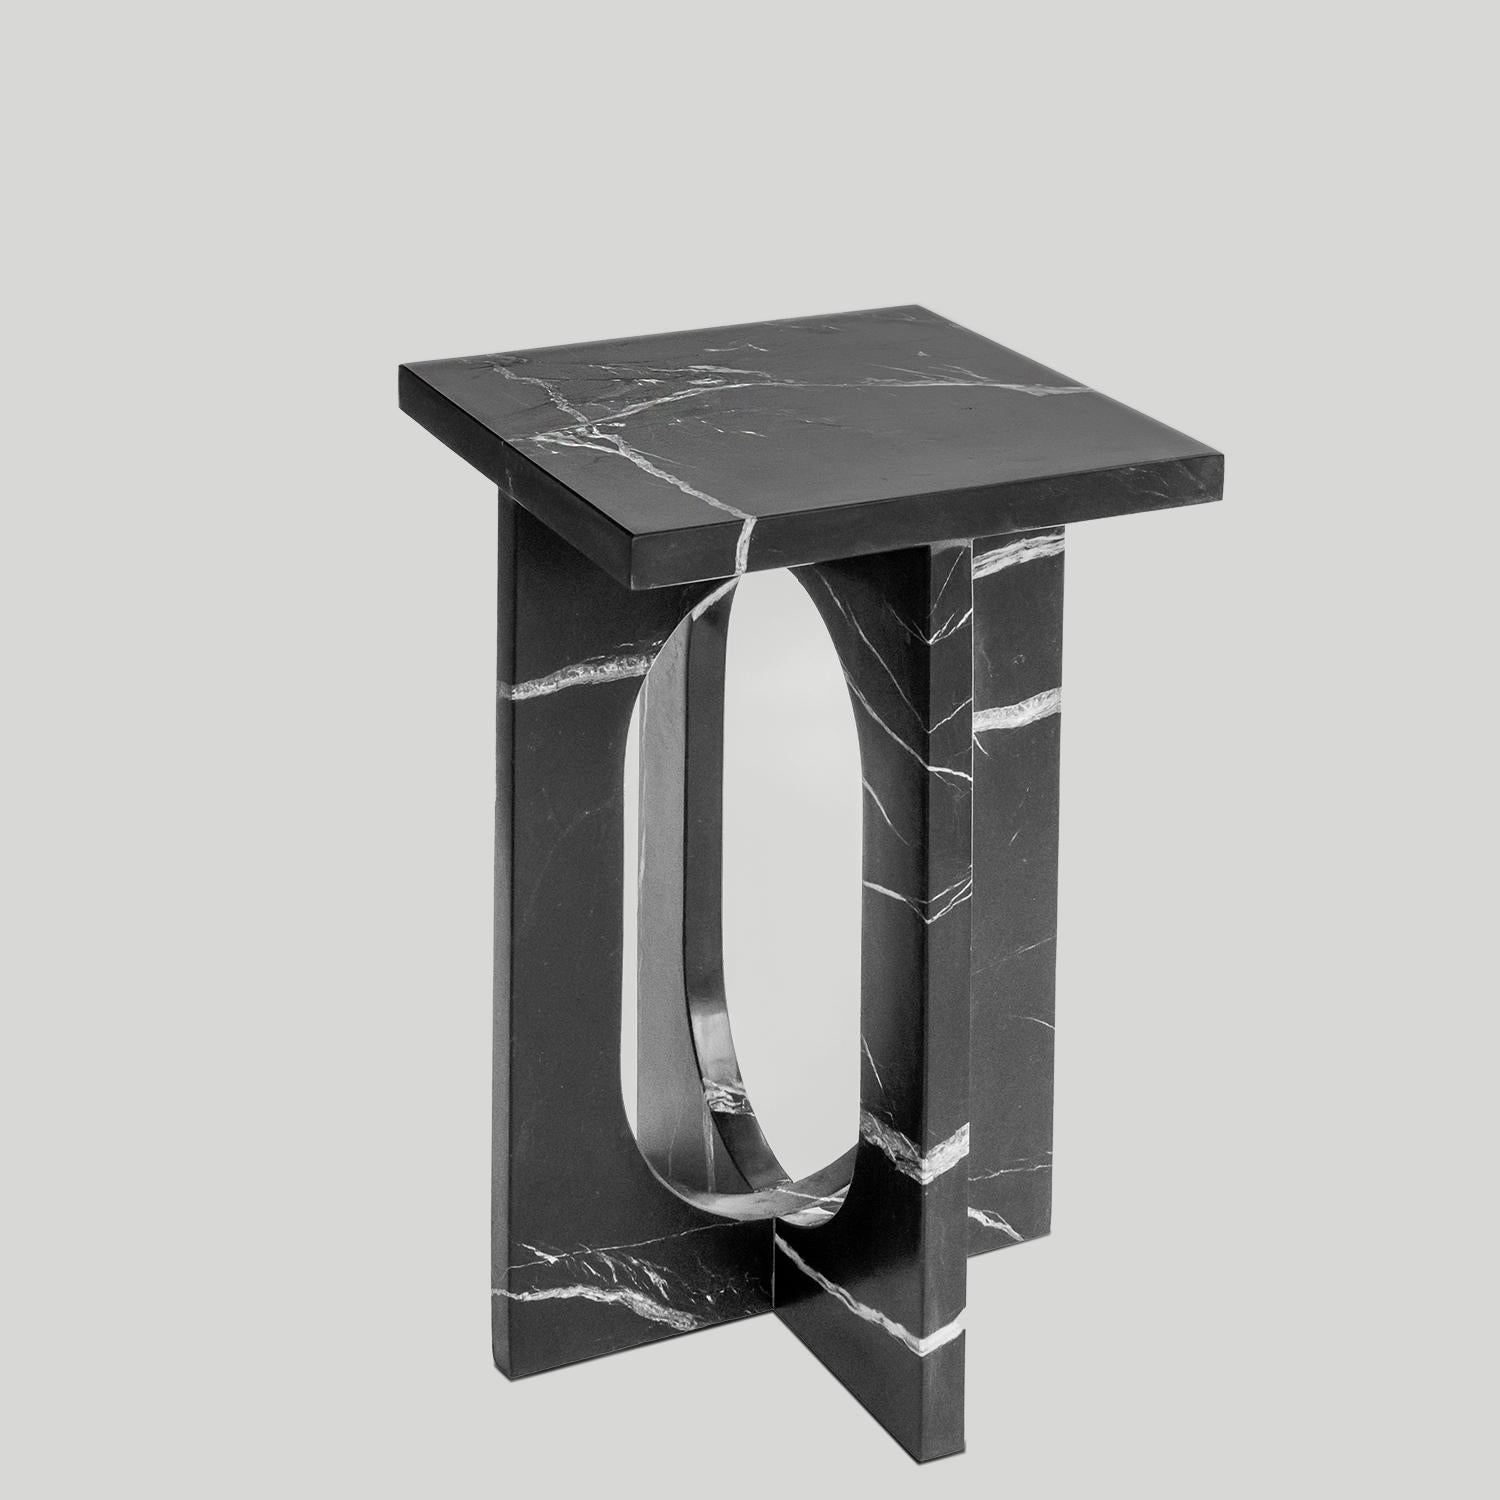 BOND Side Table in black marble -  Bond Side Table evokes simplicity with its modern, clean design. Crafted from honed black marble, this piece is a stylish addition to any space with its sophisticated, clean lines and sleek construction. Use Bond